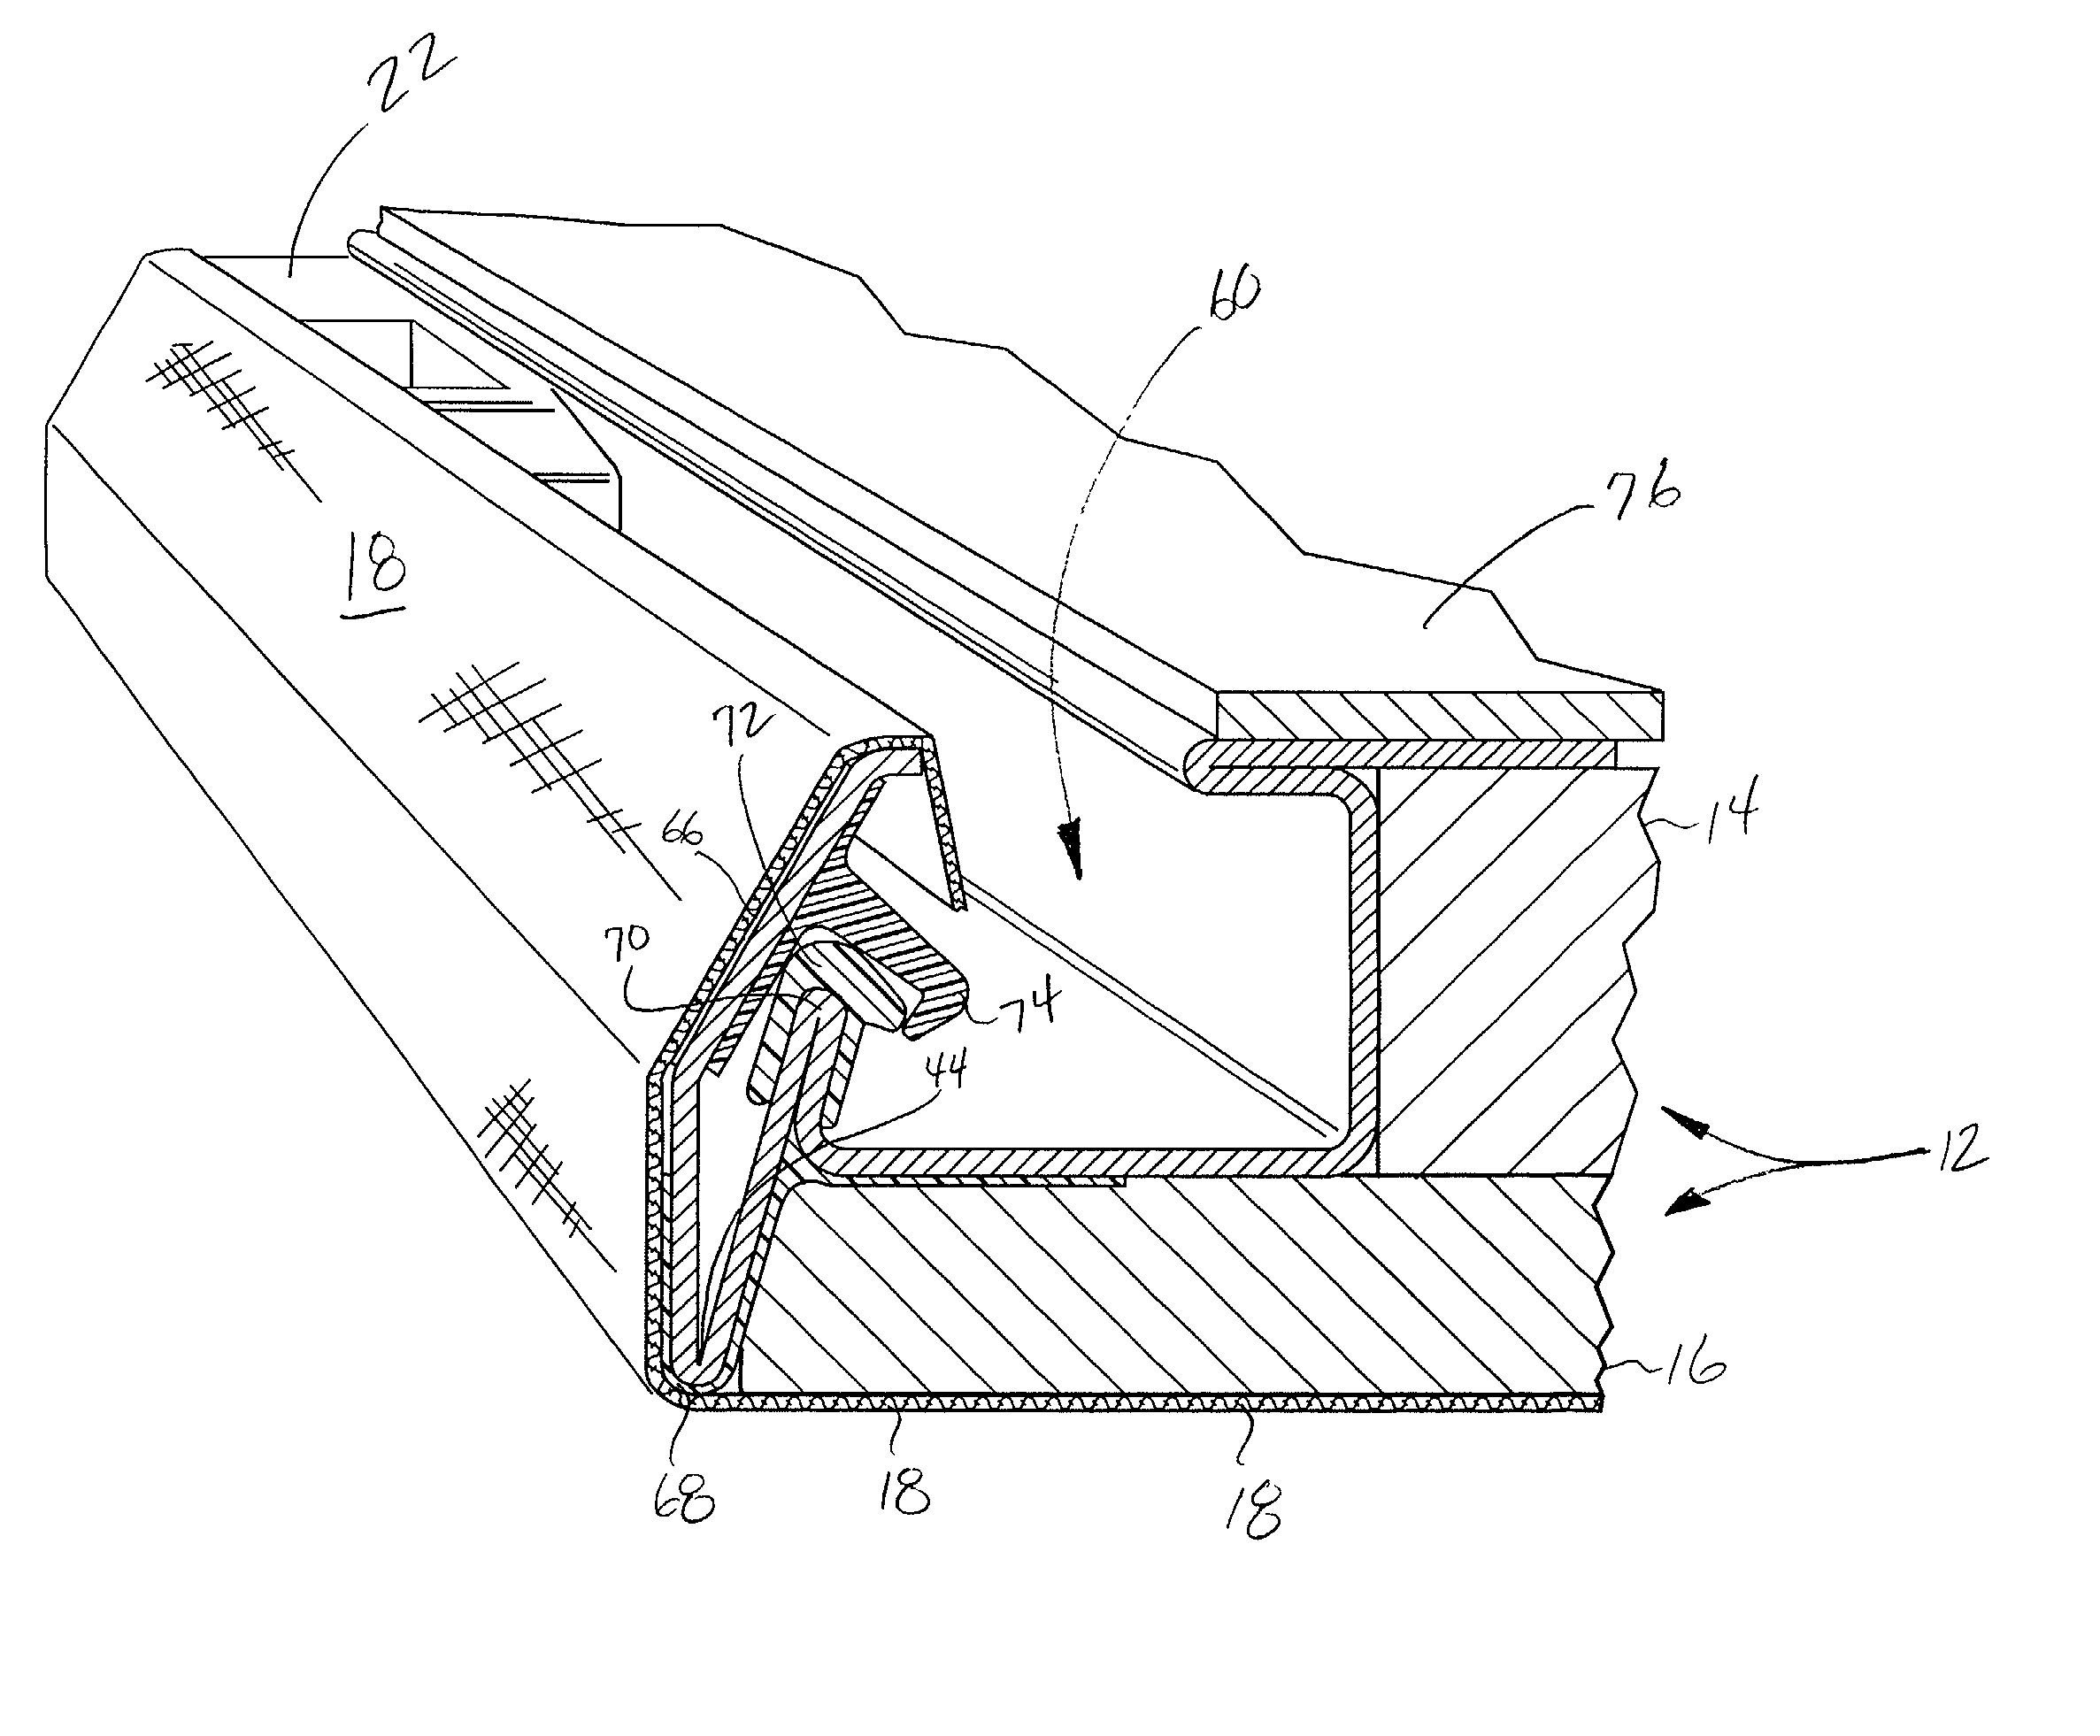 Frame assembly and frame component for tensioning fabric about a panel of a partition system